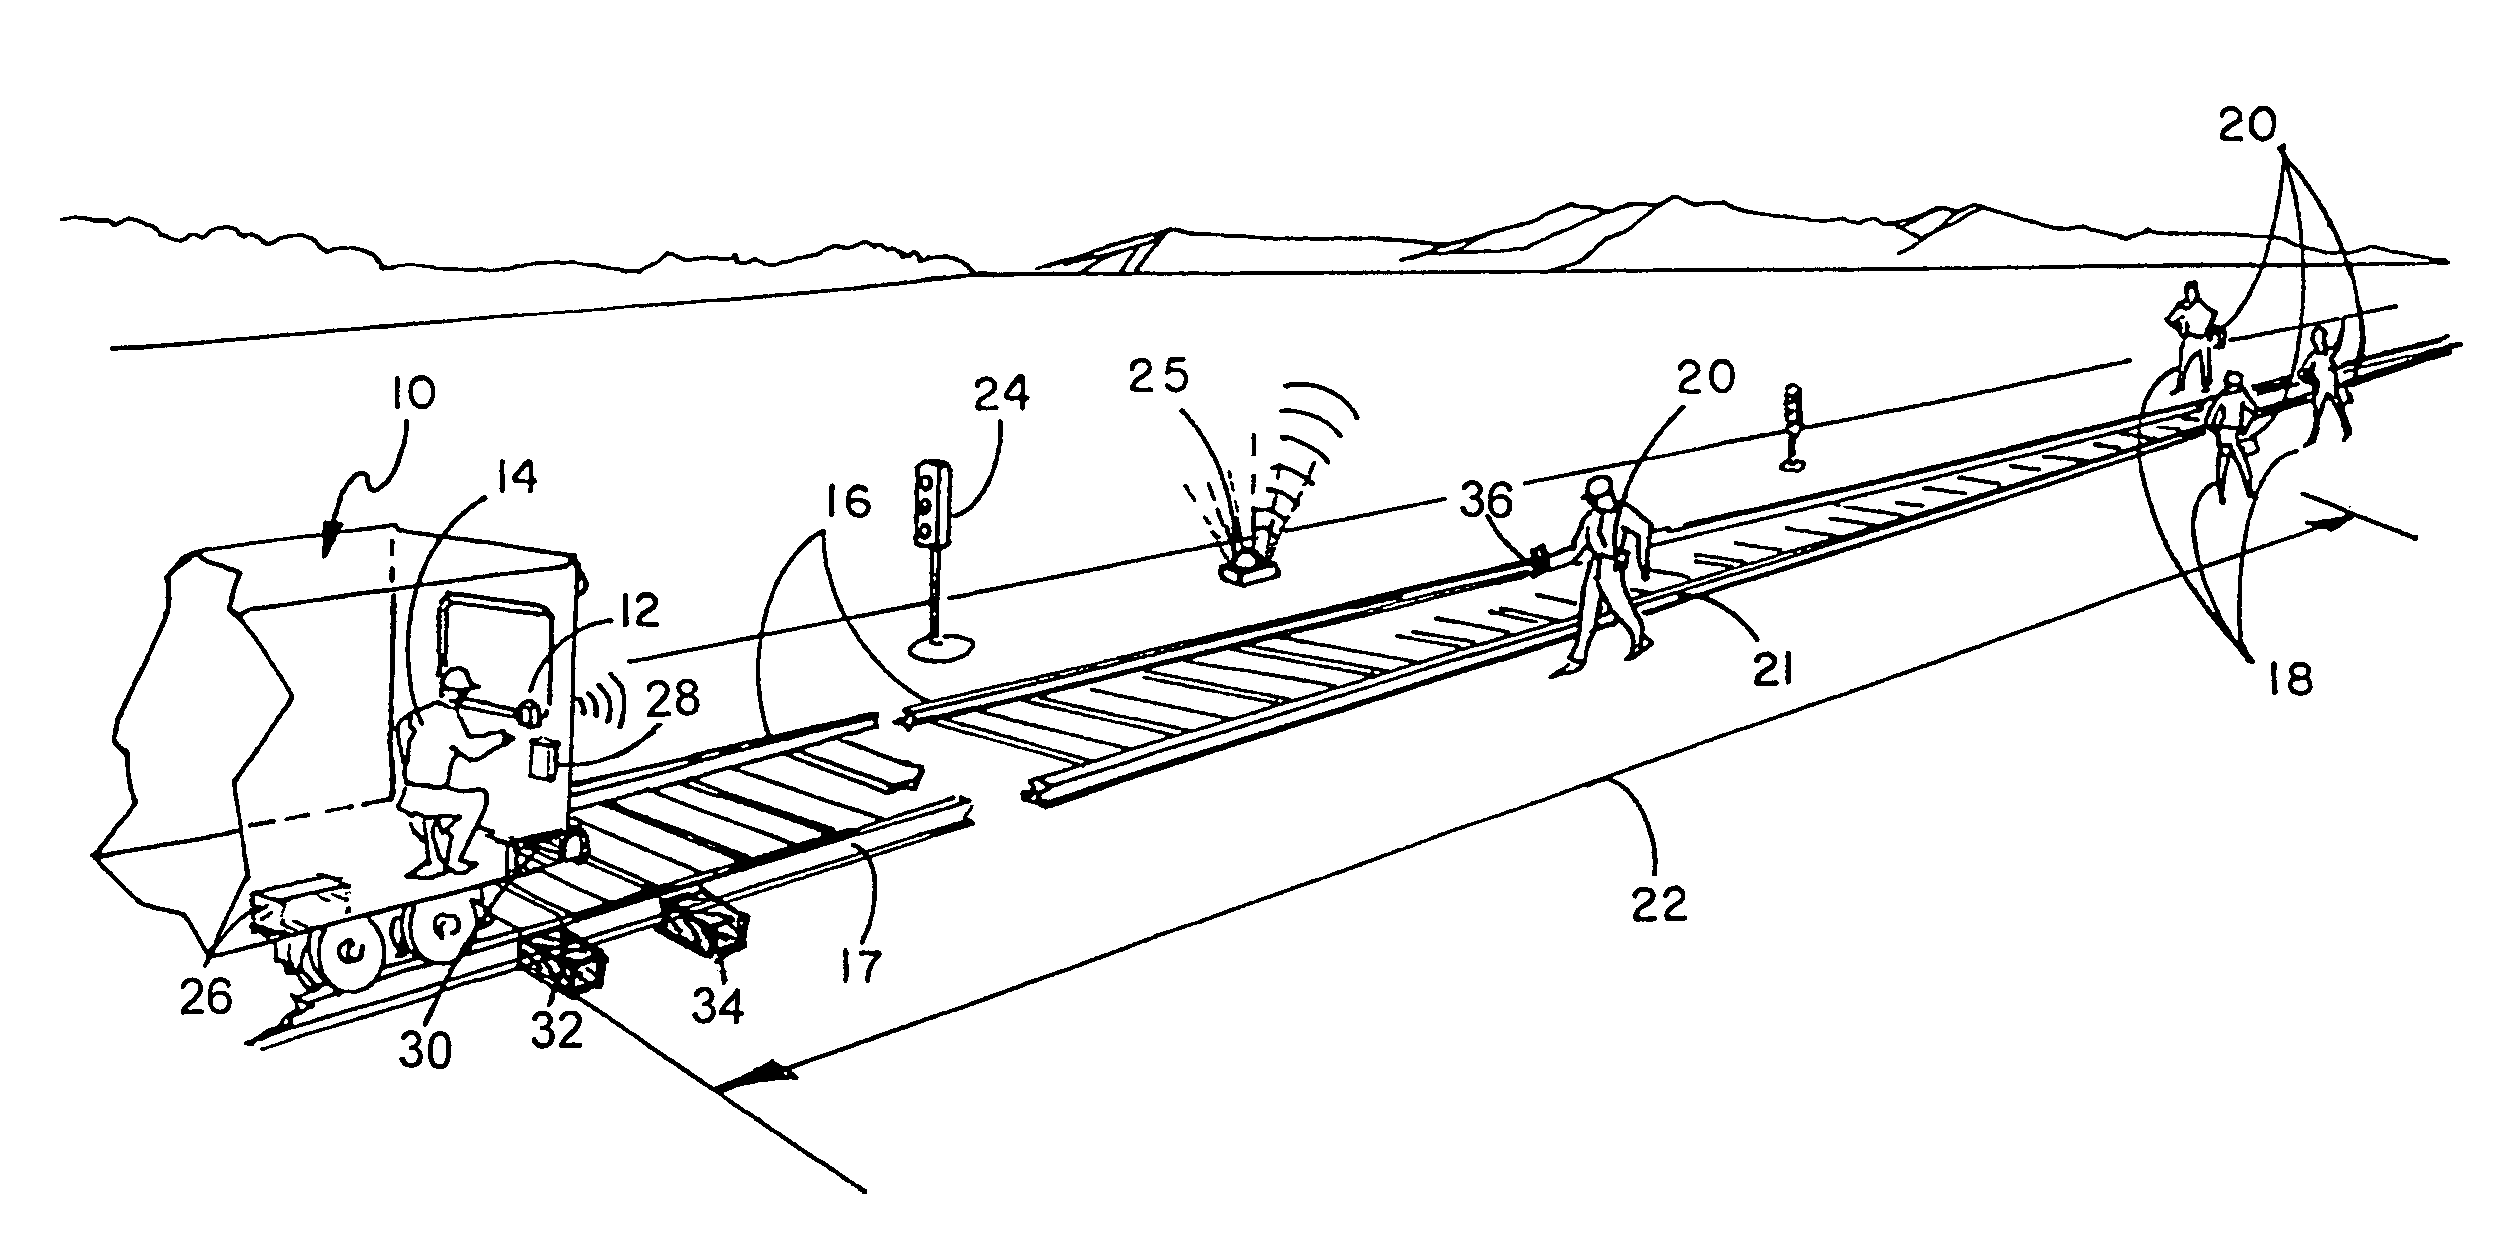 Safety system for railroad personnel